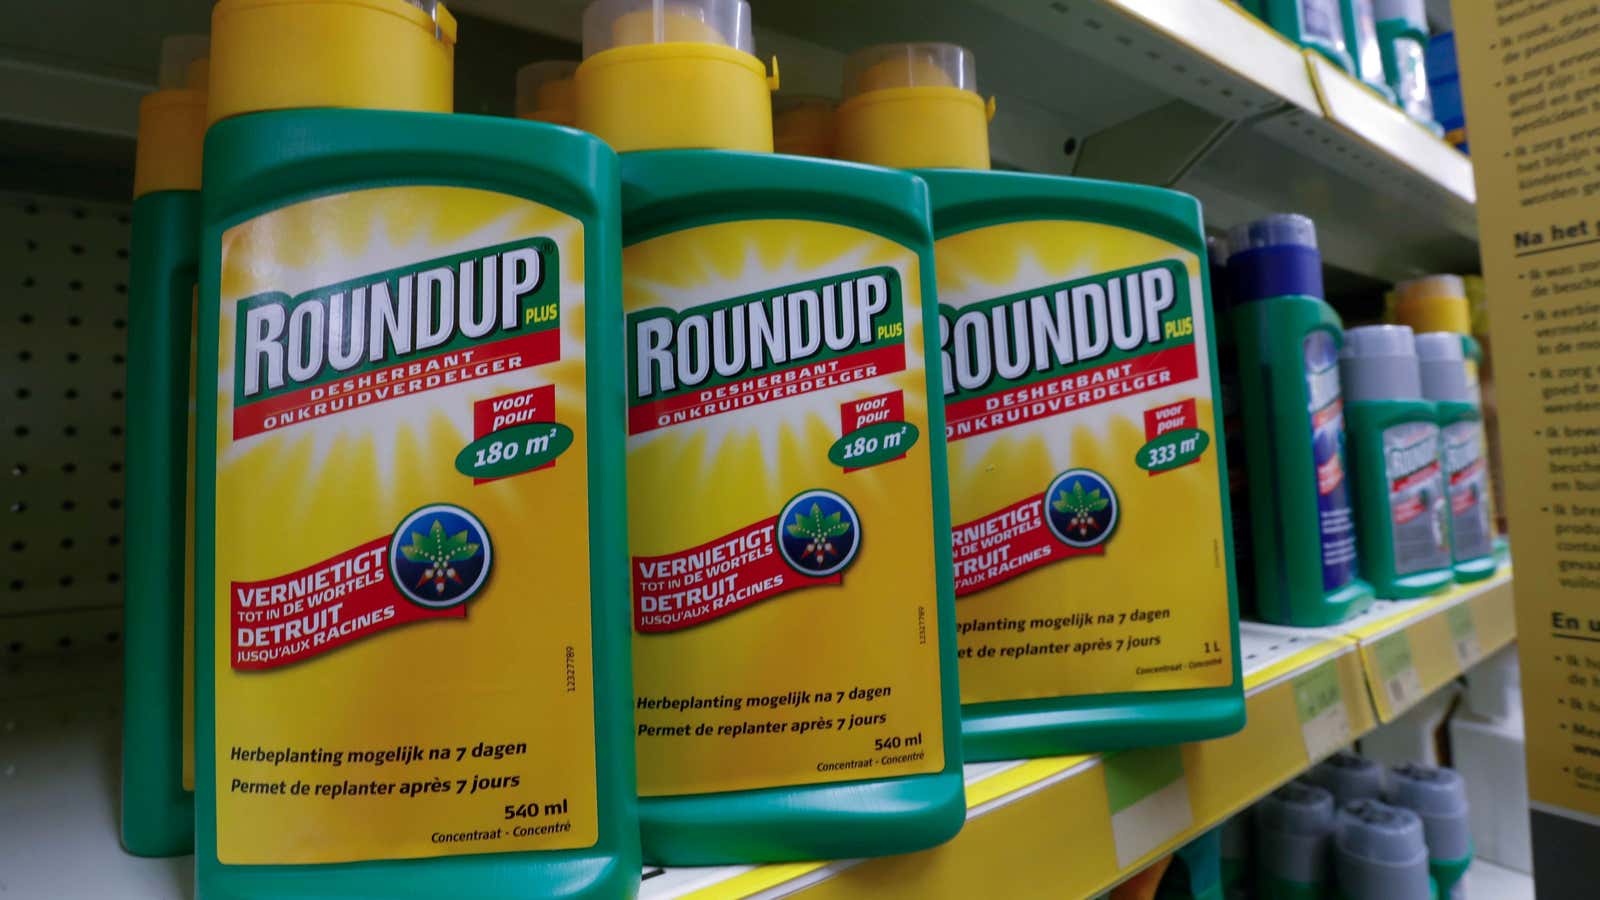 Monsanto’s Roundup weedkiller atomizers are displayed for sale at a garden shop near Brussels, Belgium, on November 27, 2017.